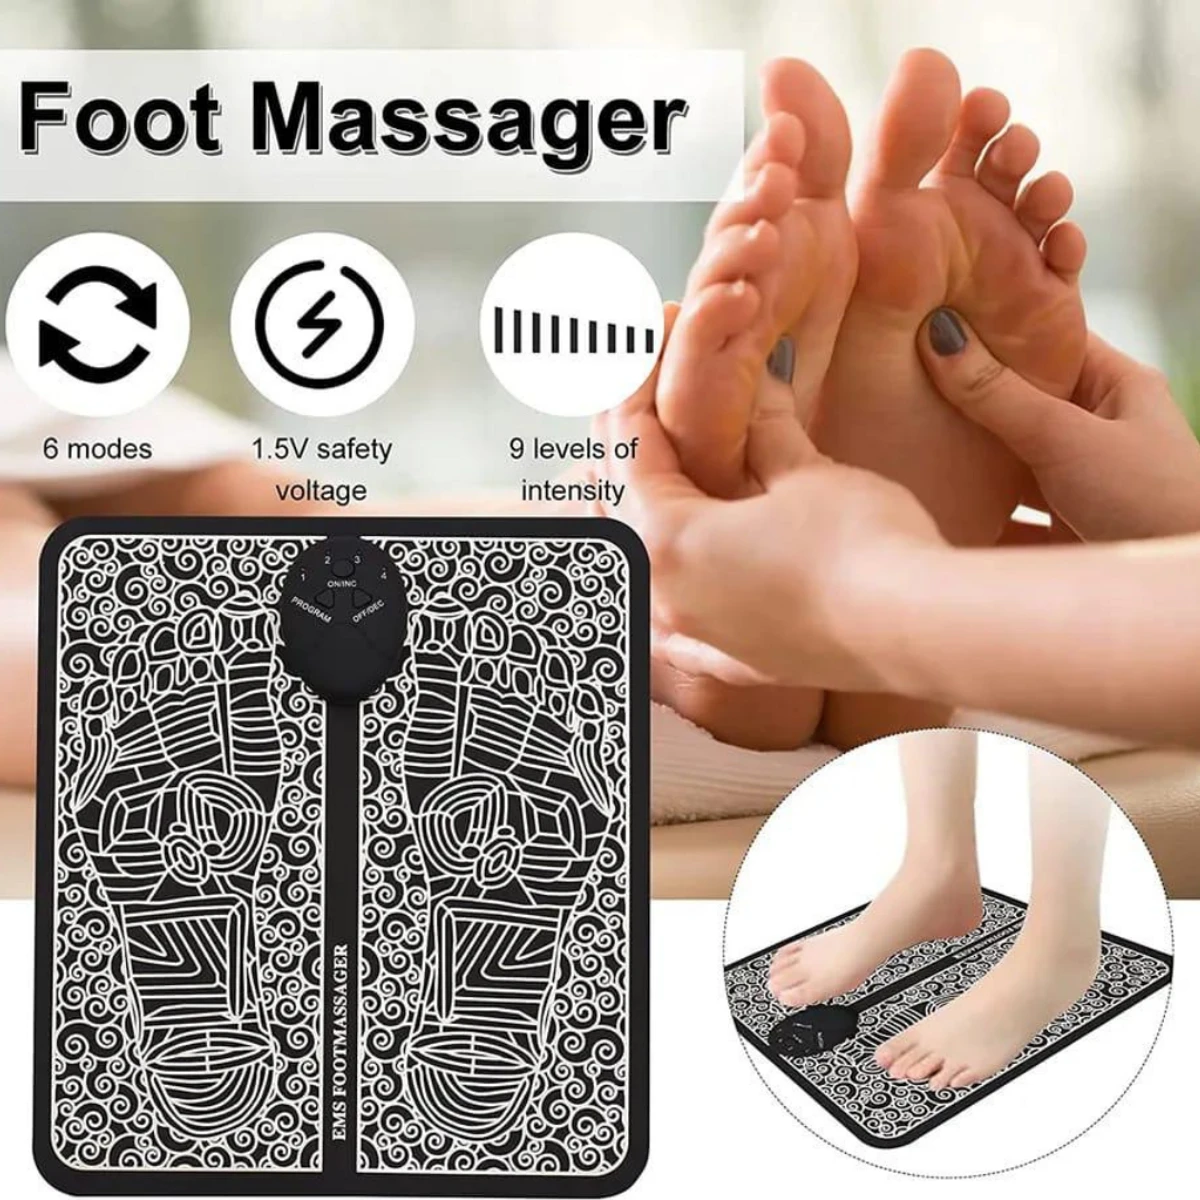 EMS Foot and Body Massager Combo Offer